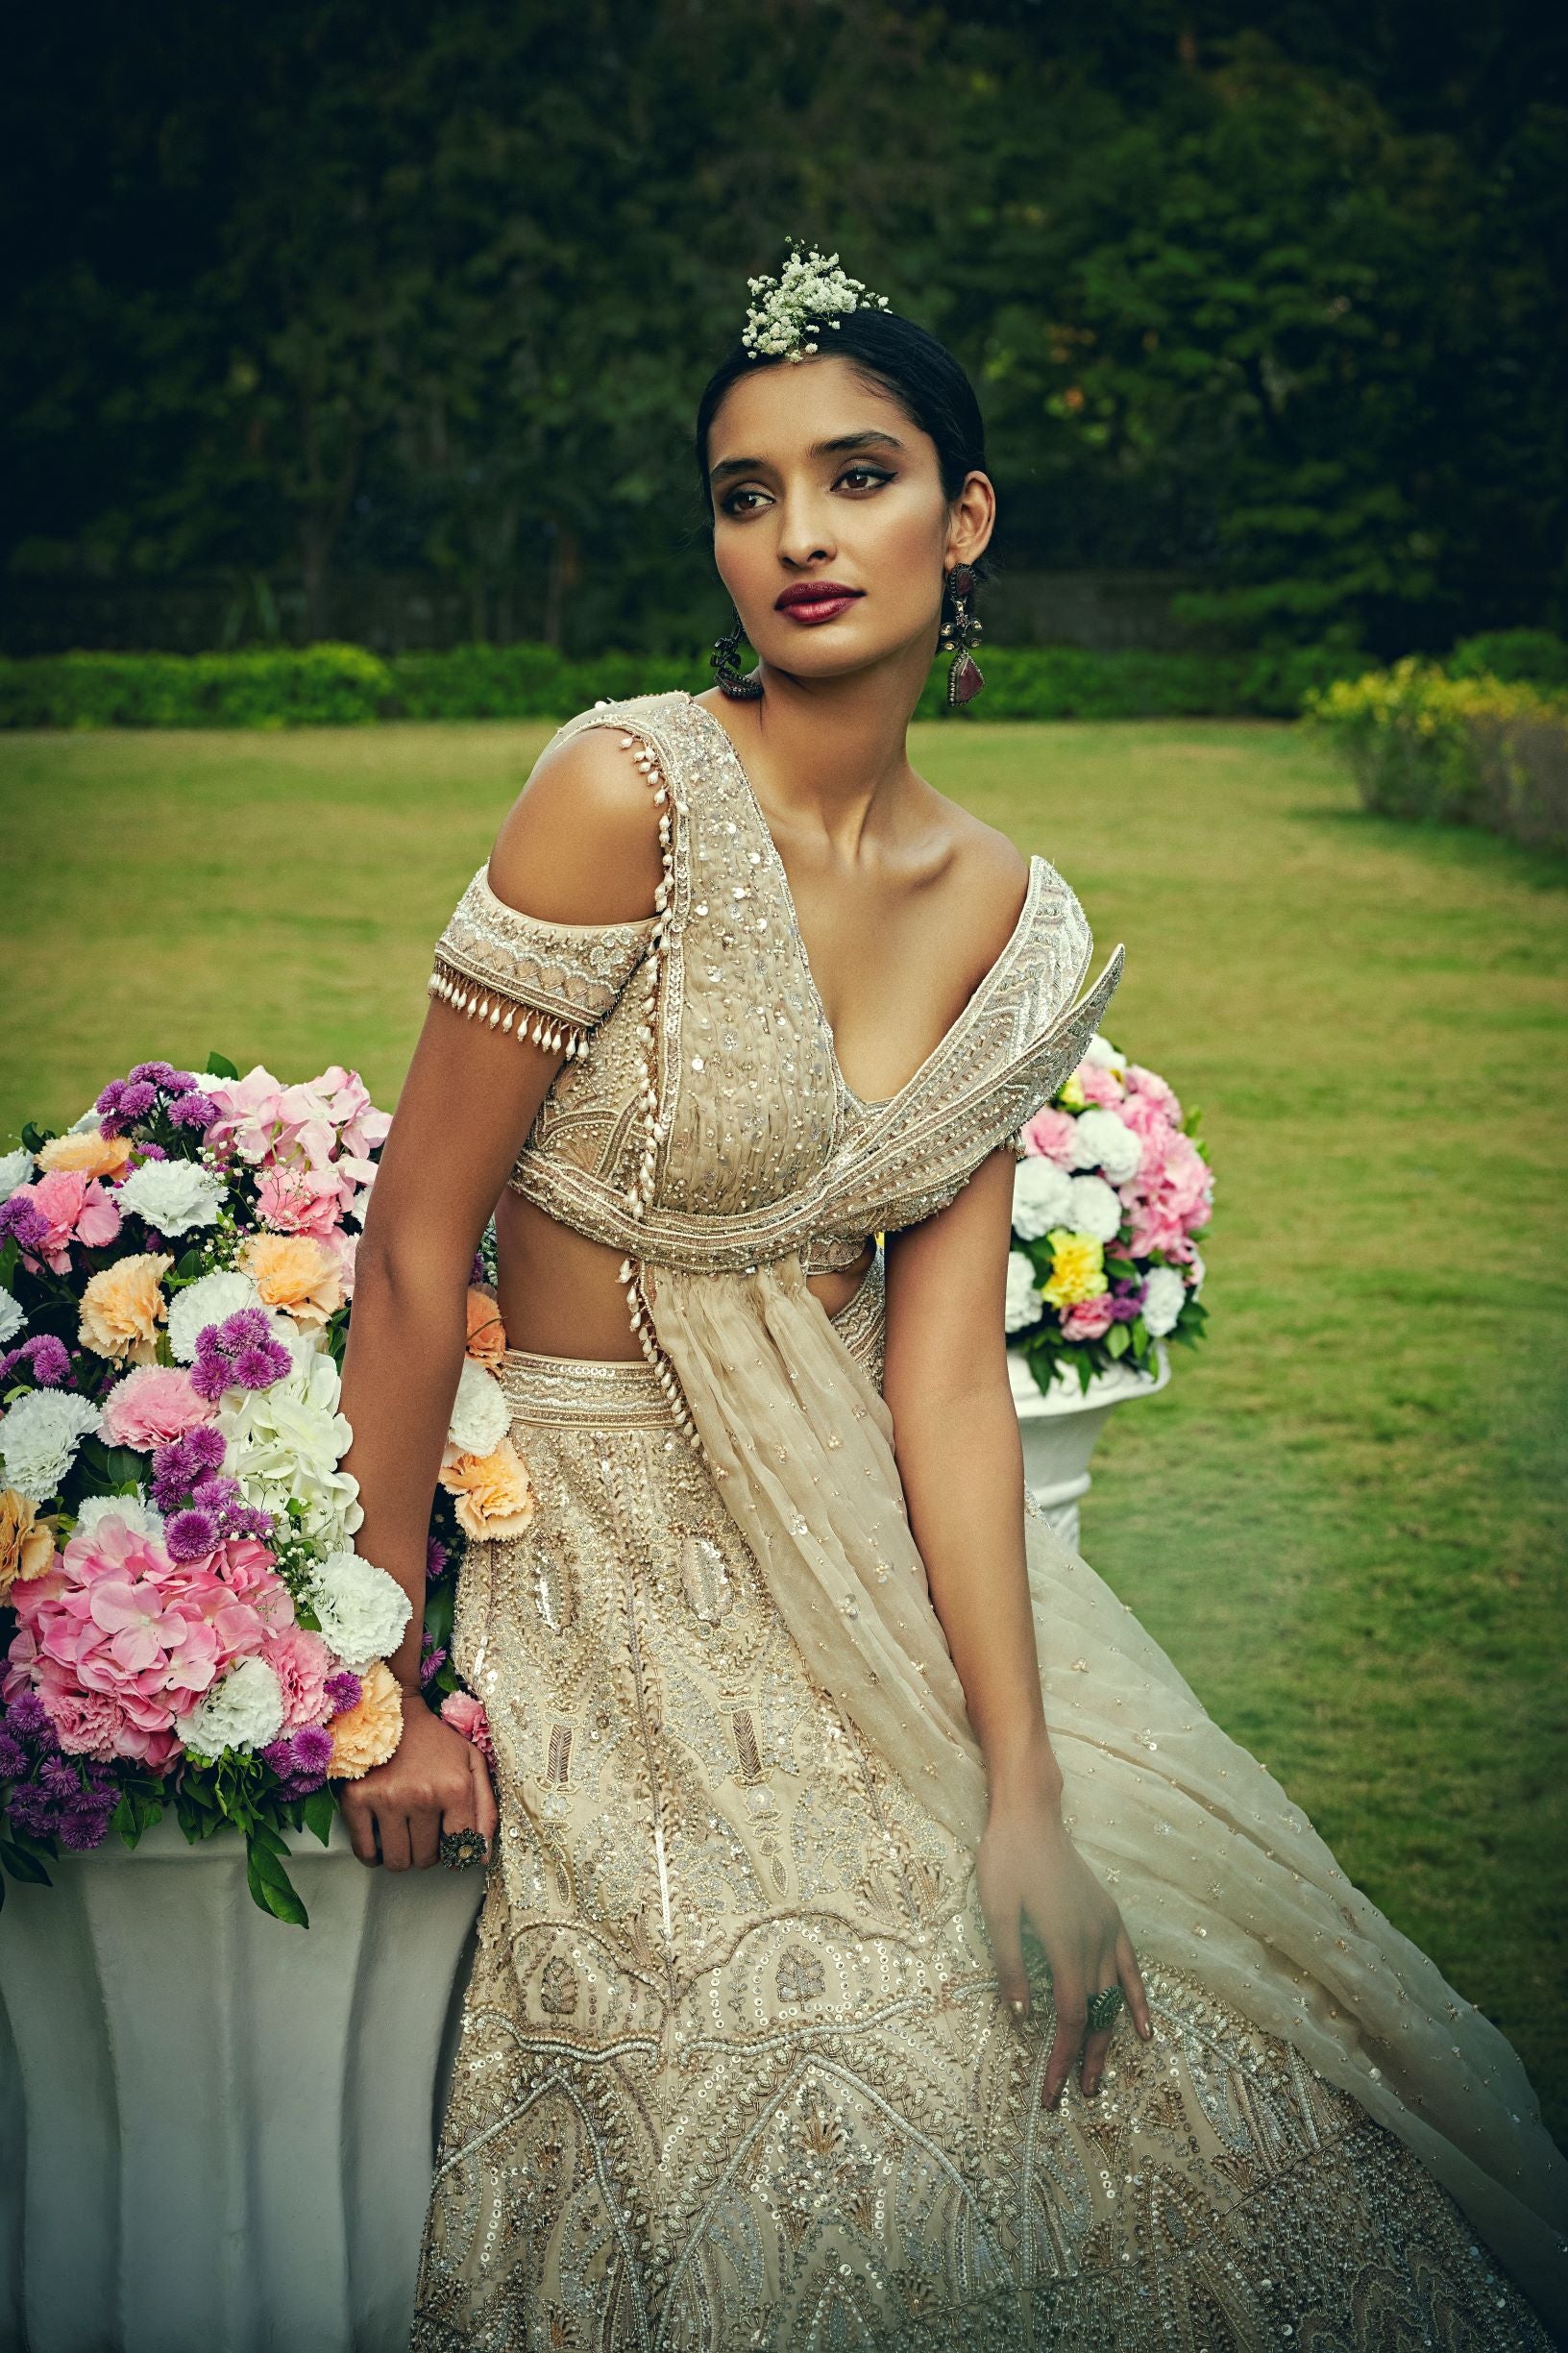 Ecru Carnation Skein Lehenga with Chantilly Lace, Pearl Bustier & Lace